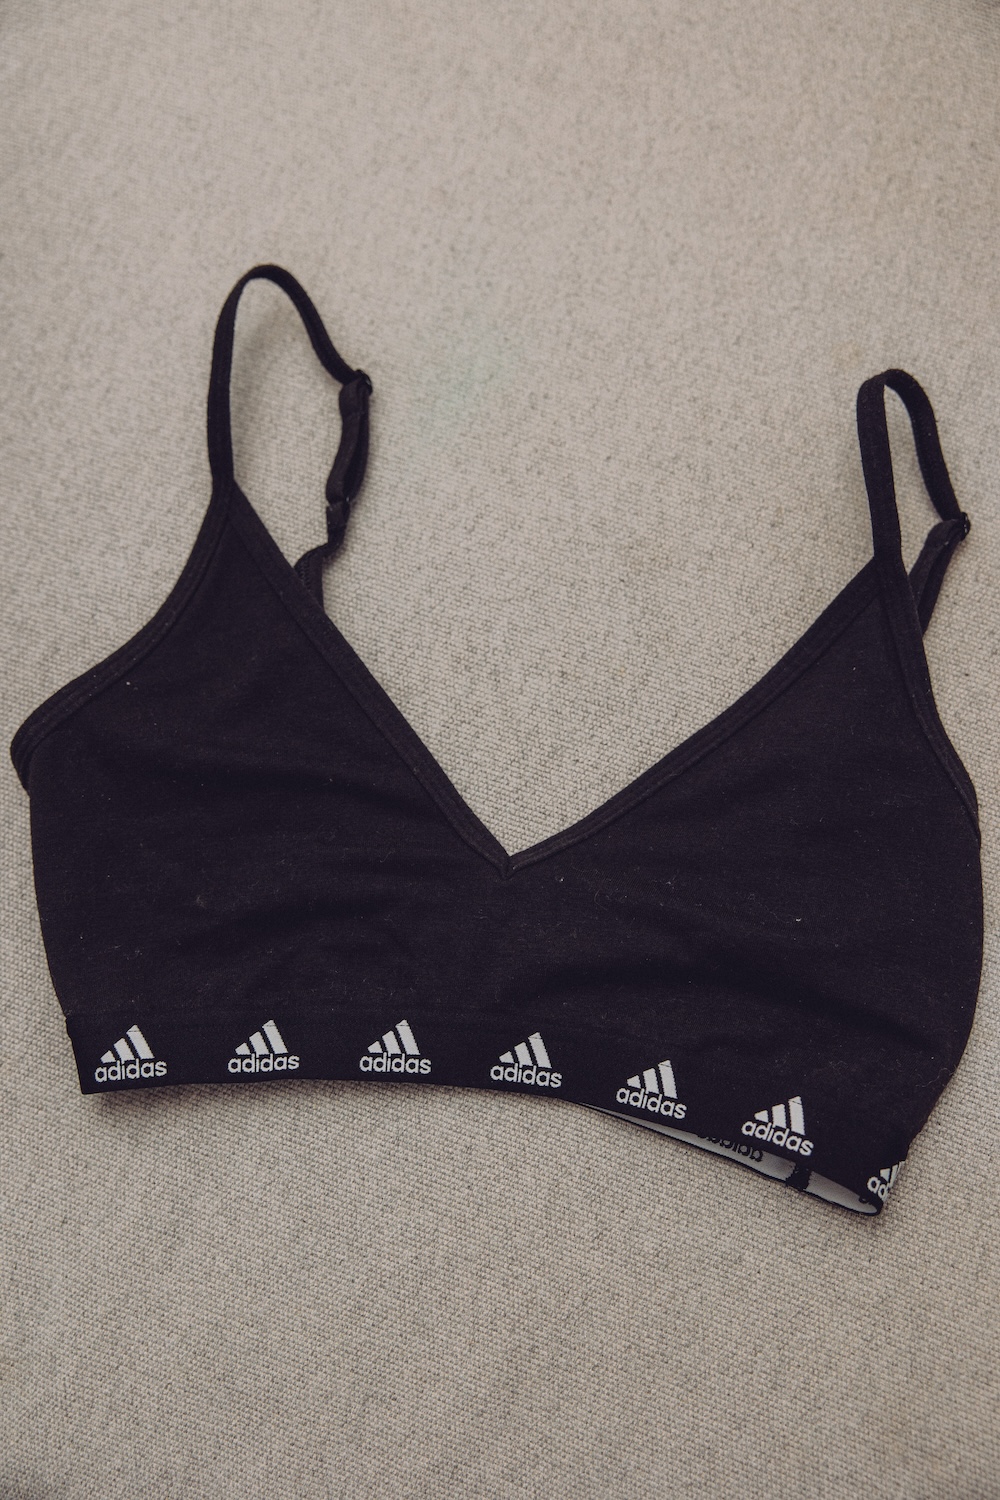 How To Wear A Sports Bra & Choose The Perfect Fit - keep it simpElle